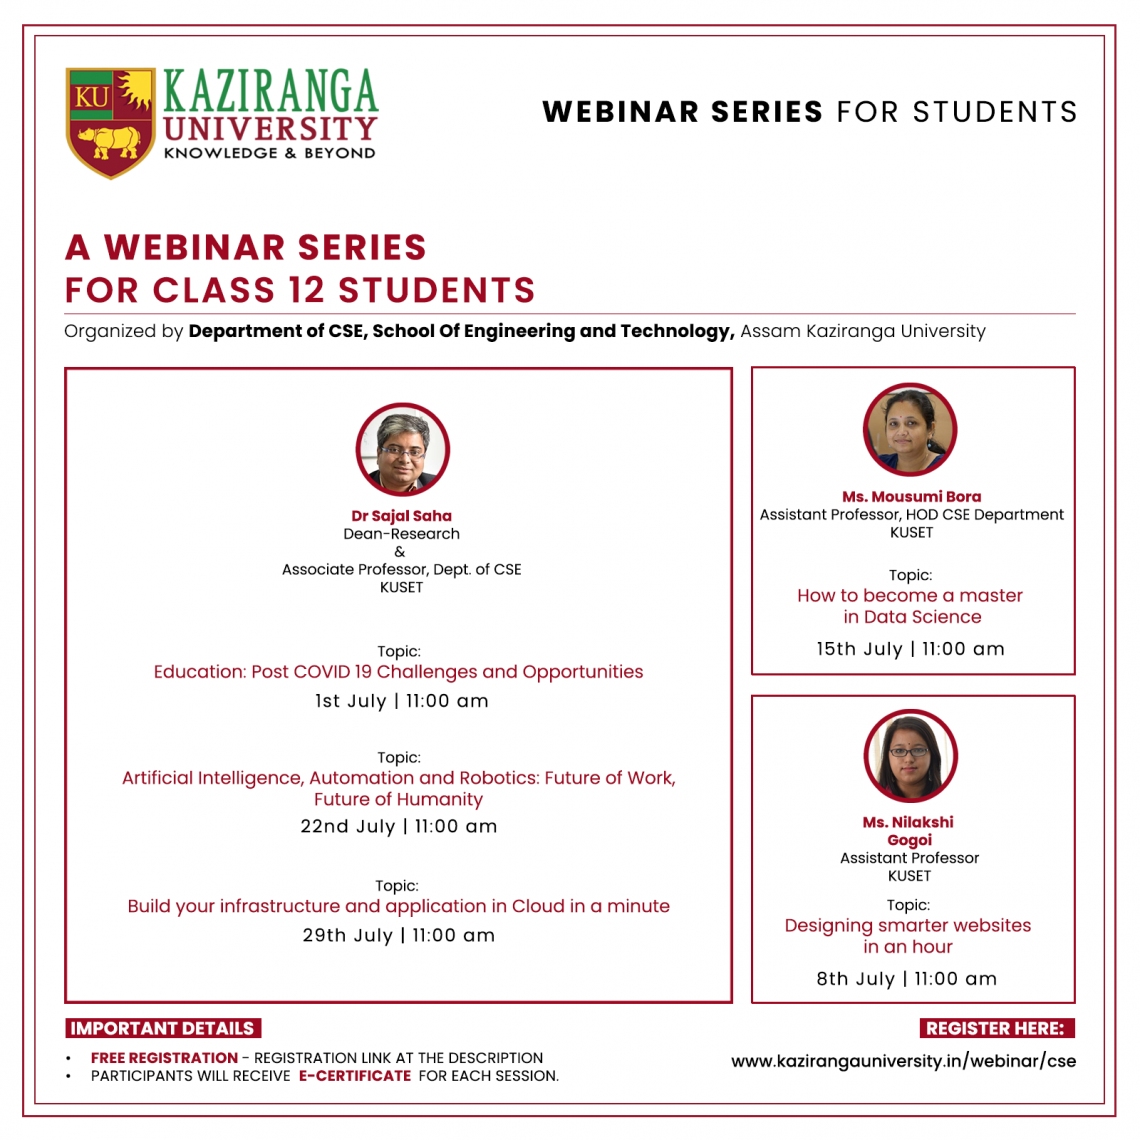 A webinar series for class 12 students organized by department of Computer Science Engineering